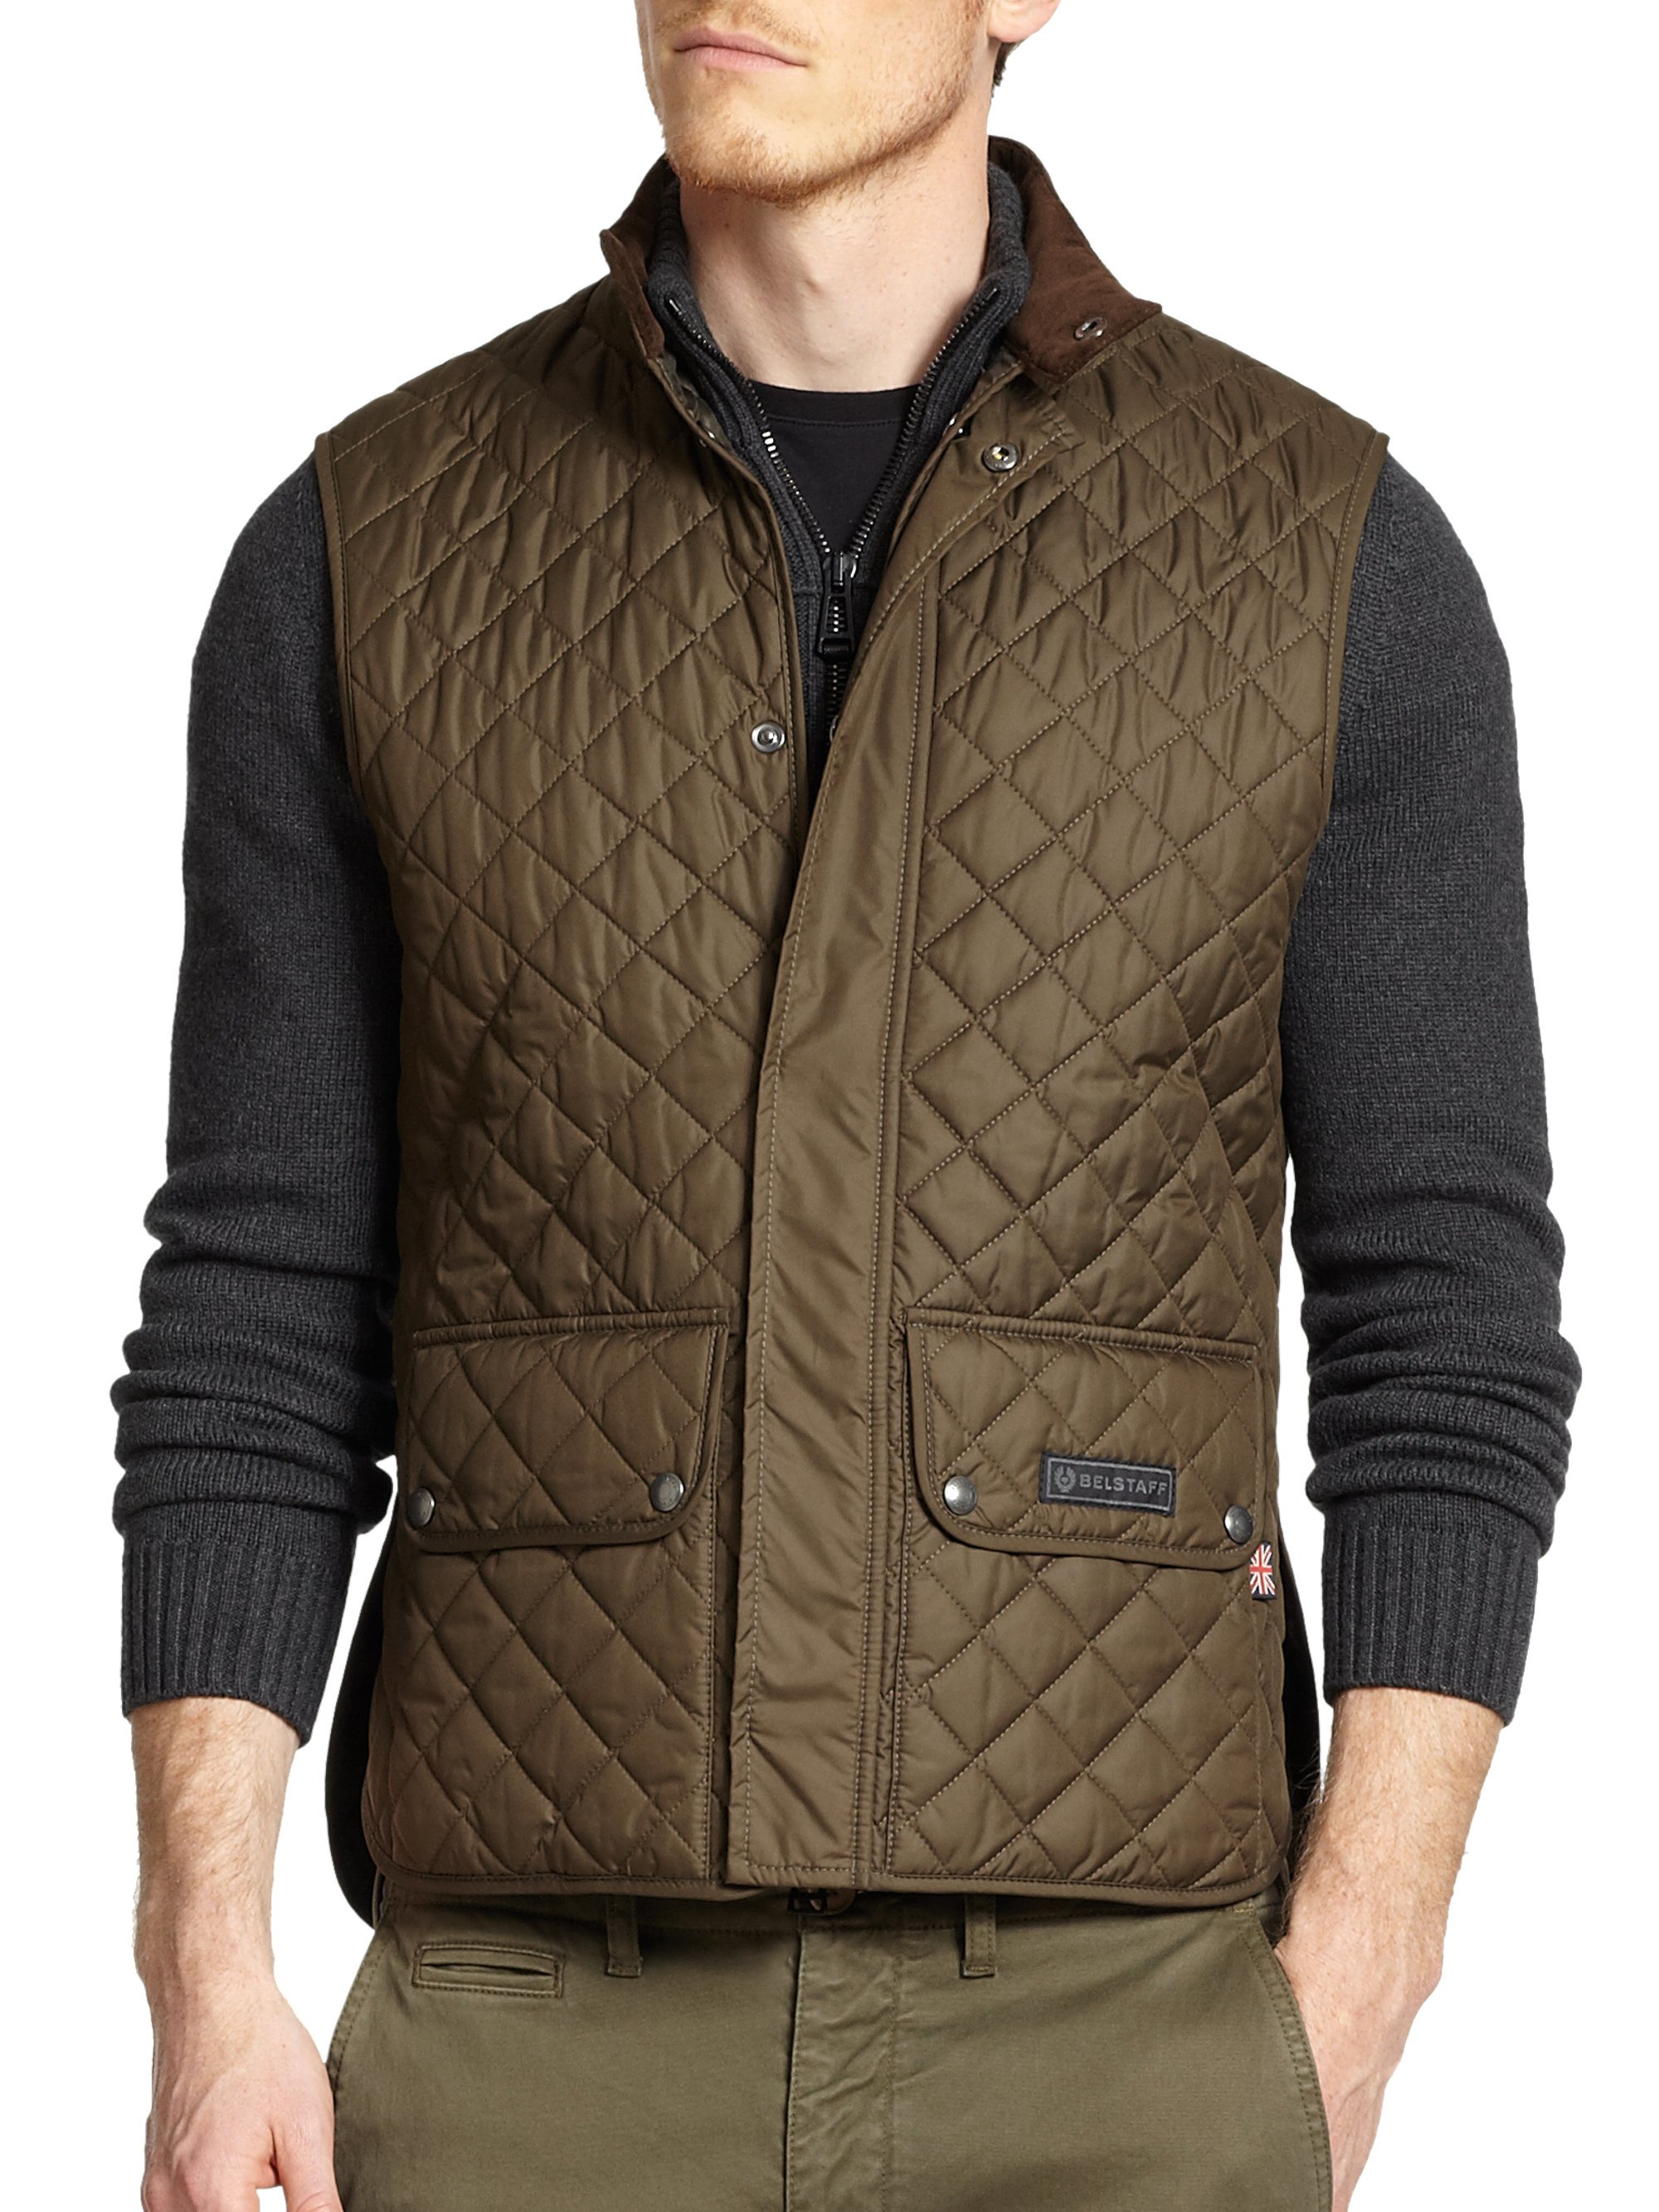 Belstaff Lightweight Technical Quilted Vest In Green For Men Faded